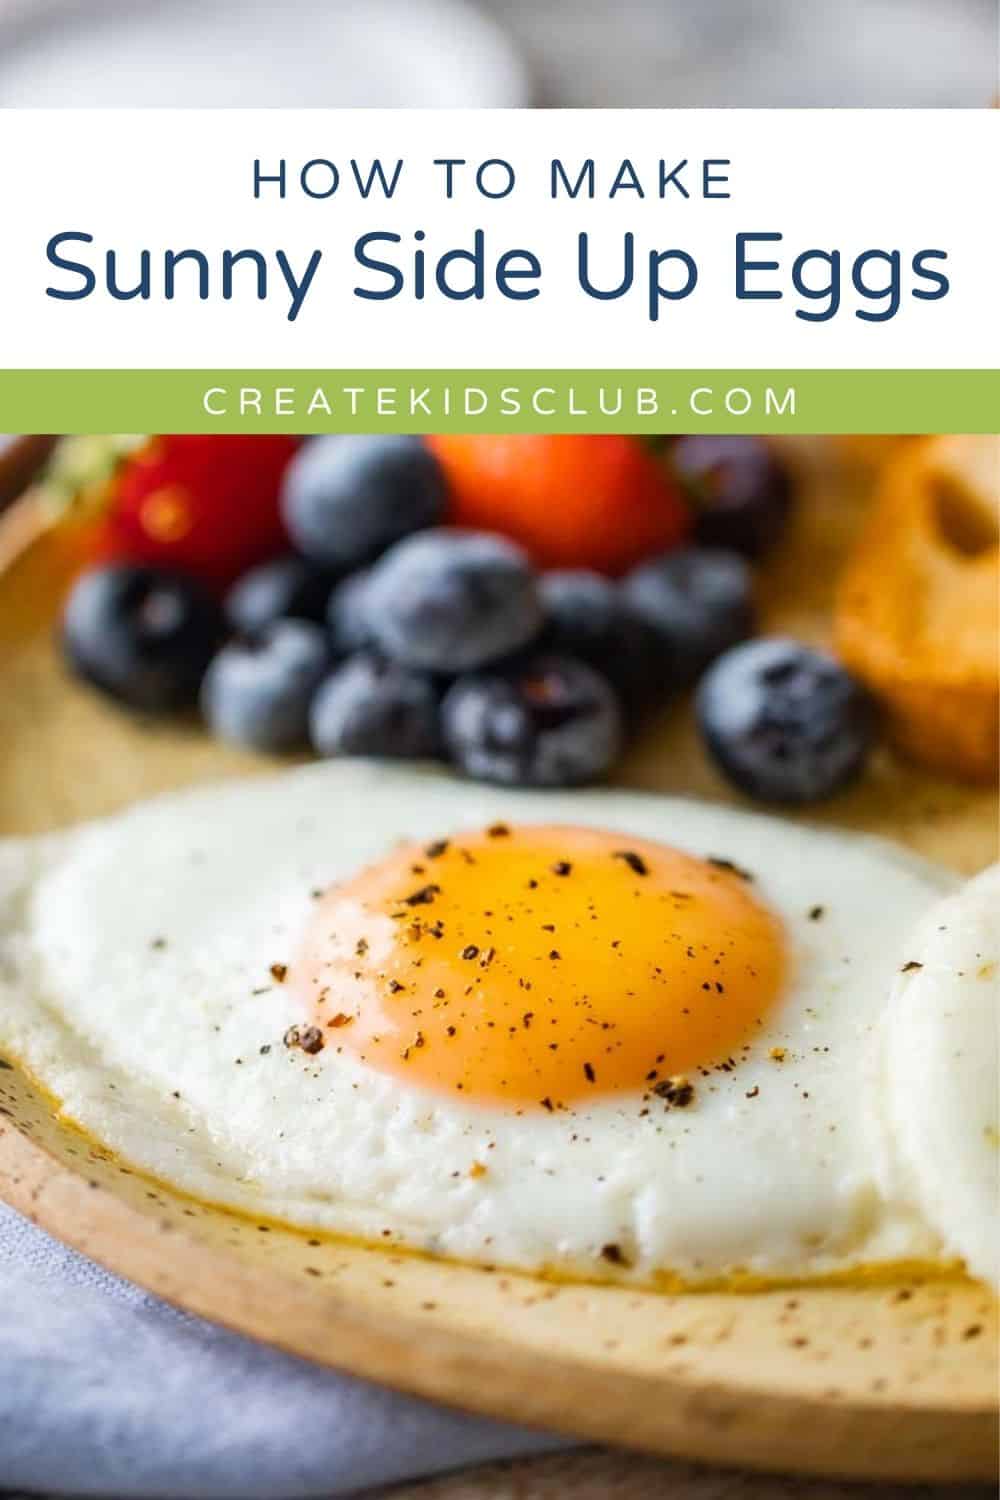 Pin of a sunny side up egg with fruit